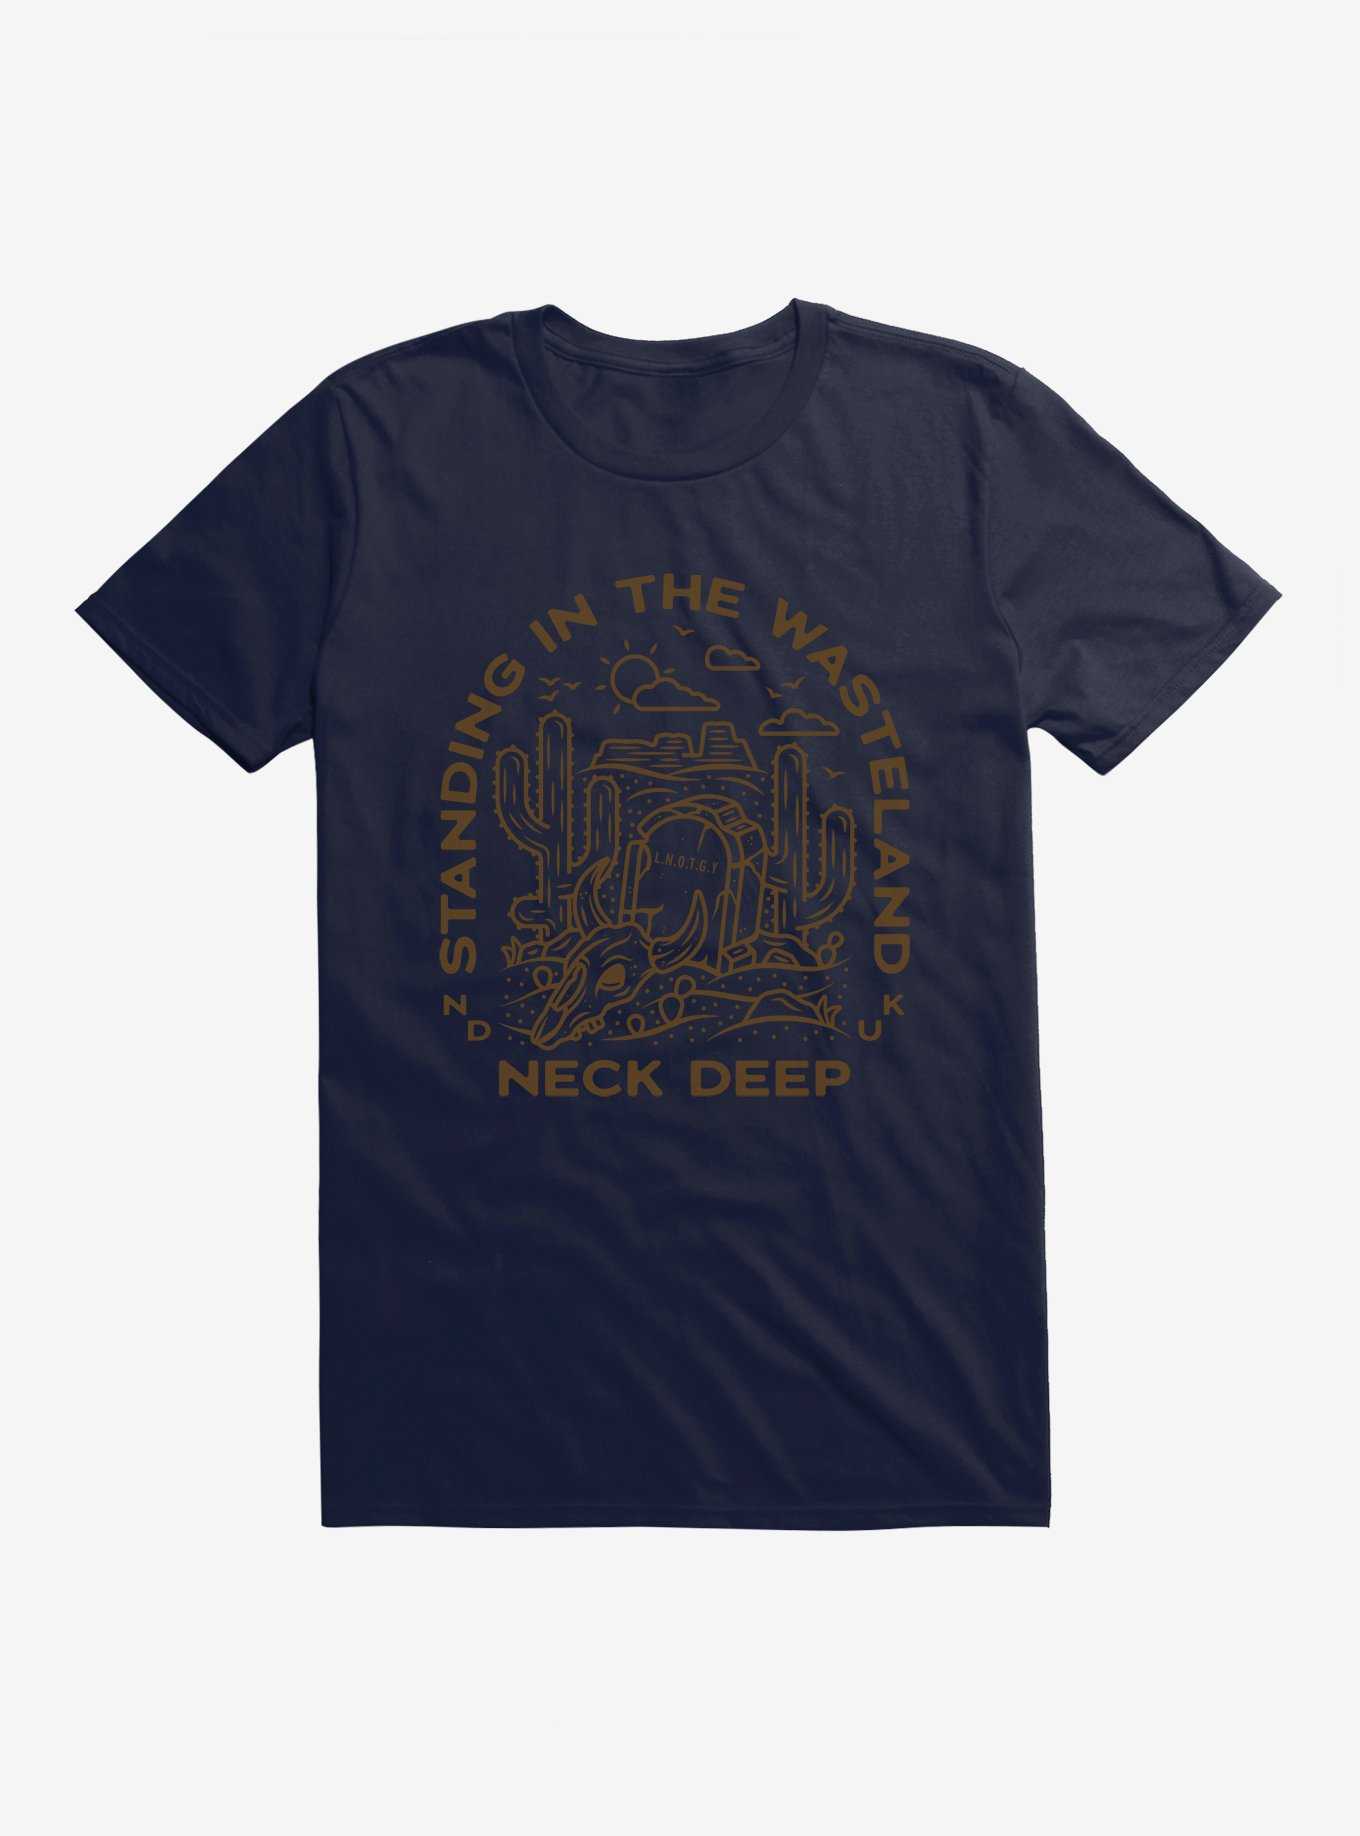 Neck Deep Standing In The Wasteland T-Shirt , , hi-res